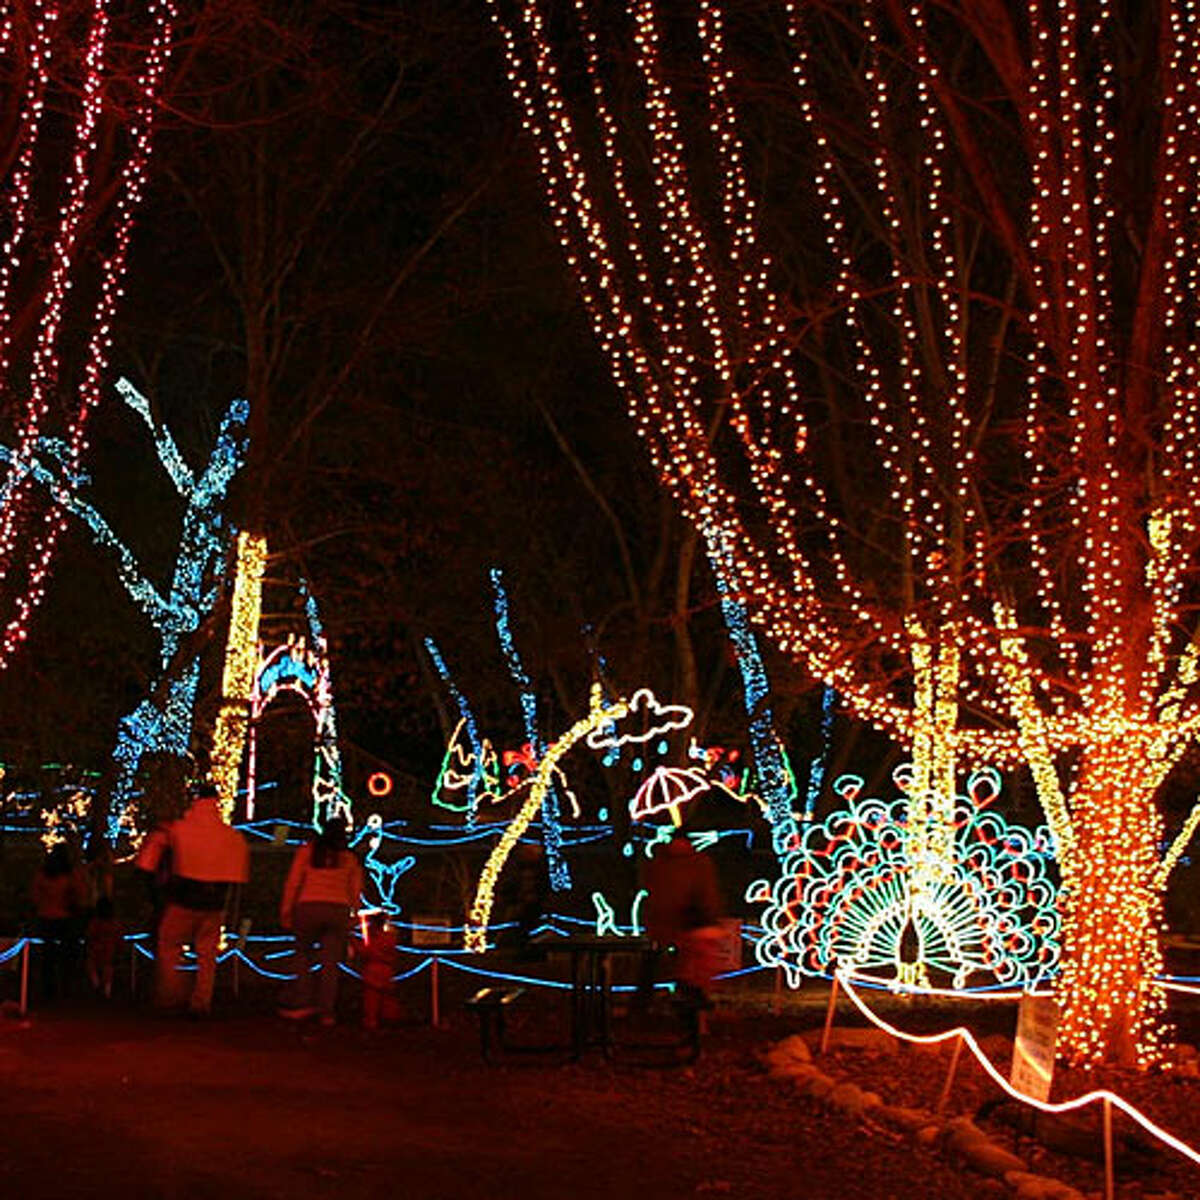 14 great holiday events in the West